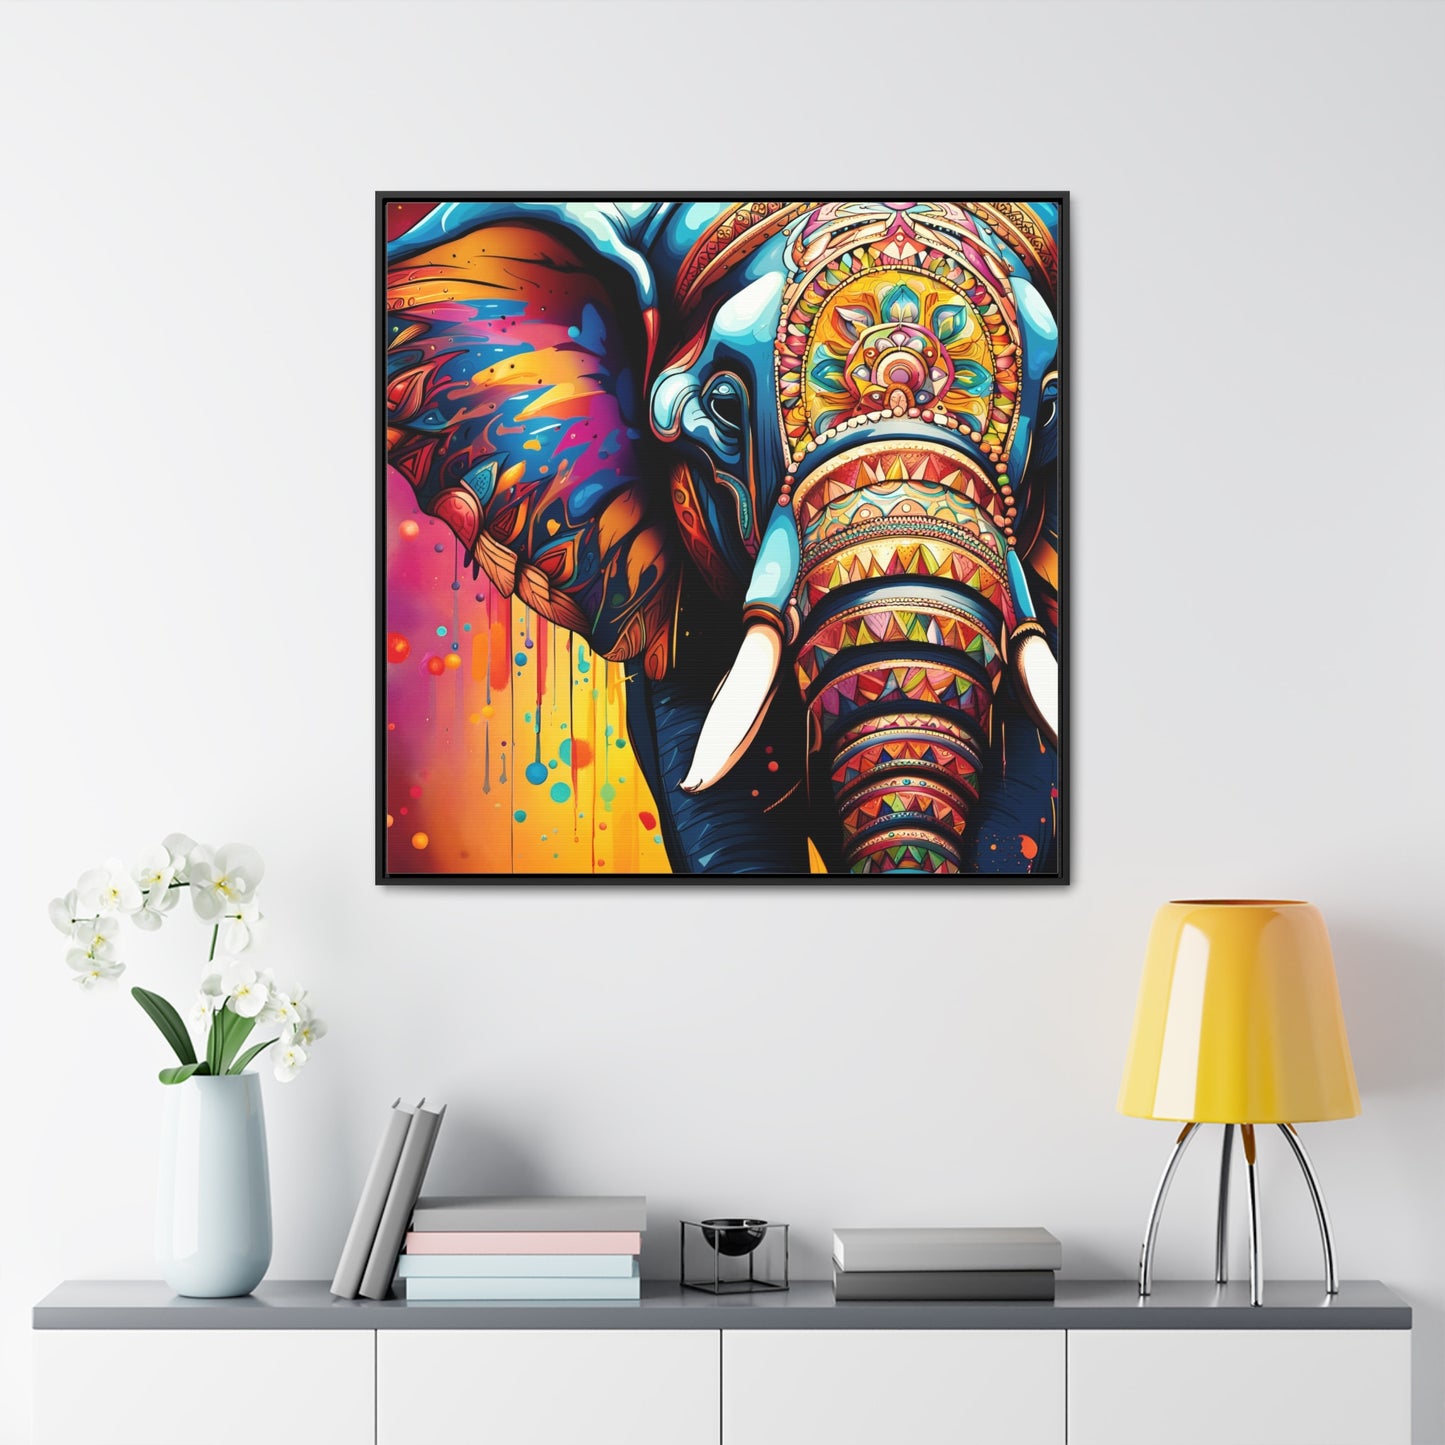 Stunning Multicolor Elephant Head Print on Canvas in a Floating Frame 36x36 hung on light wall